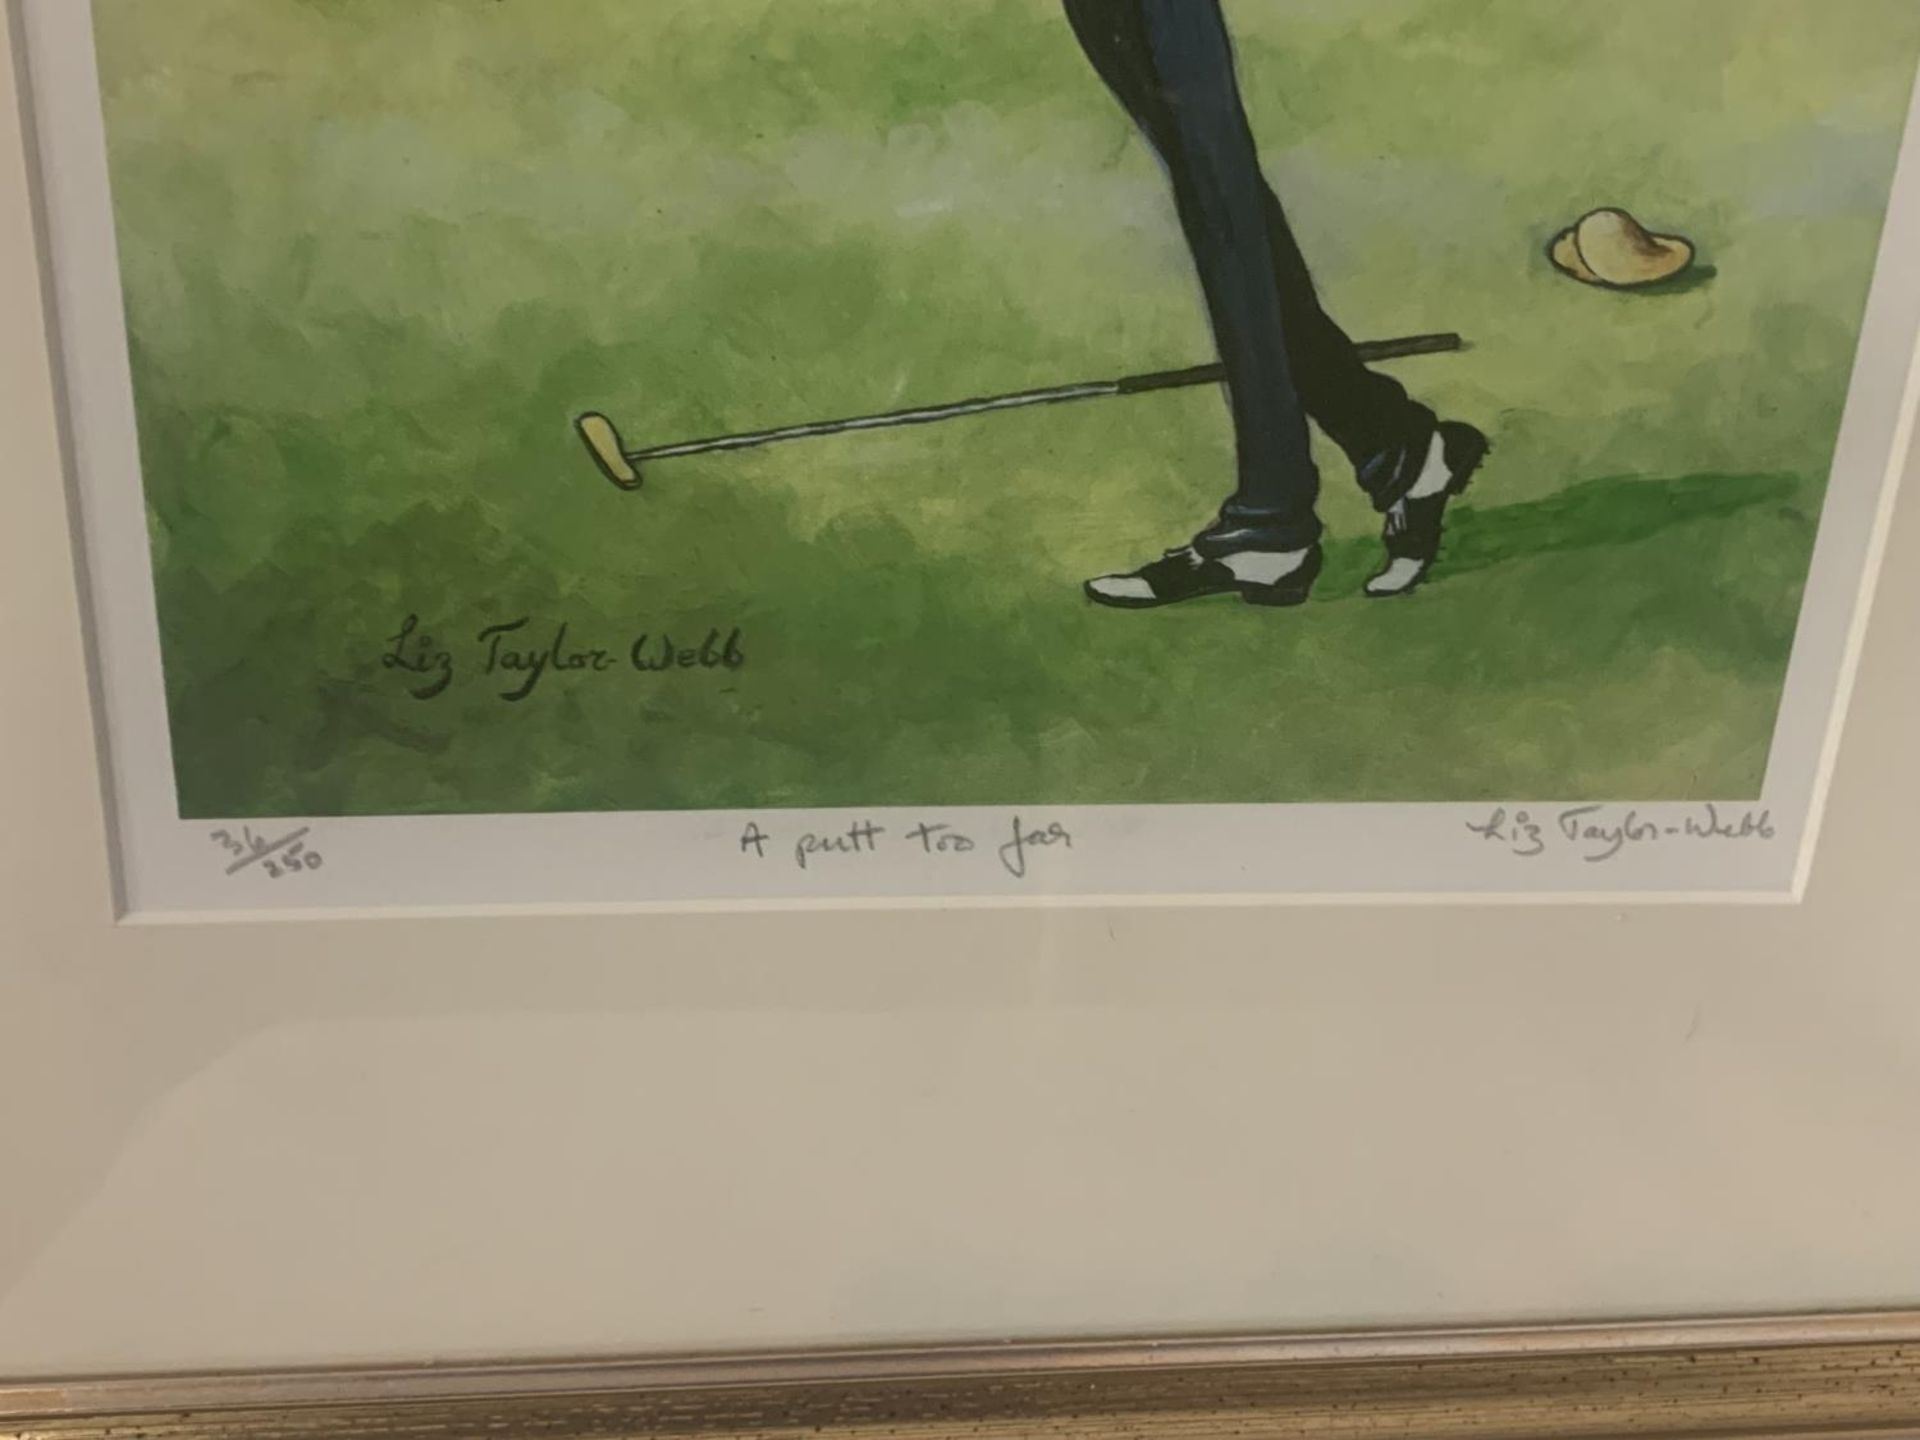 A GILT FRAMED LIMITED EDITION LIZ TAYLOR WEBB PICTURE 'A PUTT TO FAR' PENCIL SIGNED TO LOWER RIGHT - Image 3 of 3